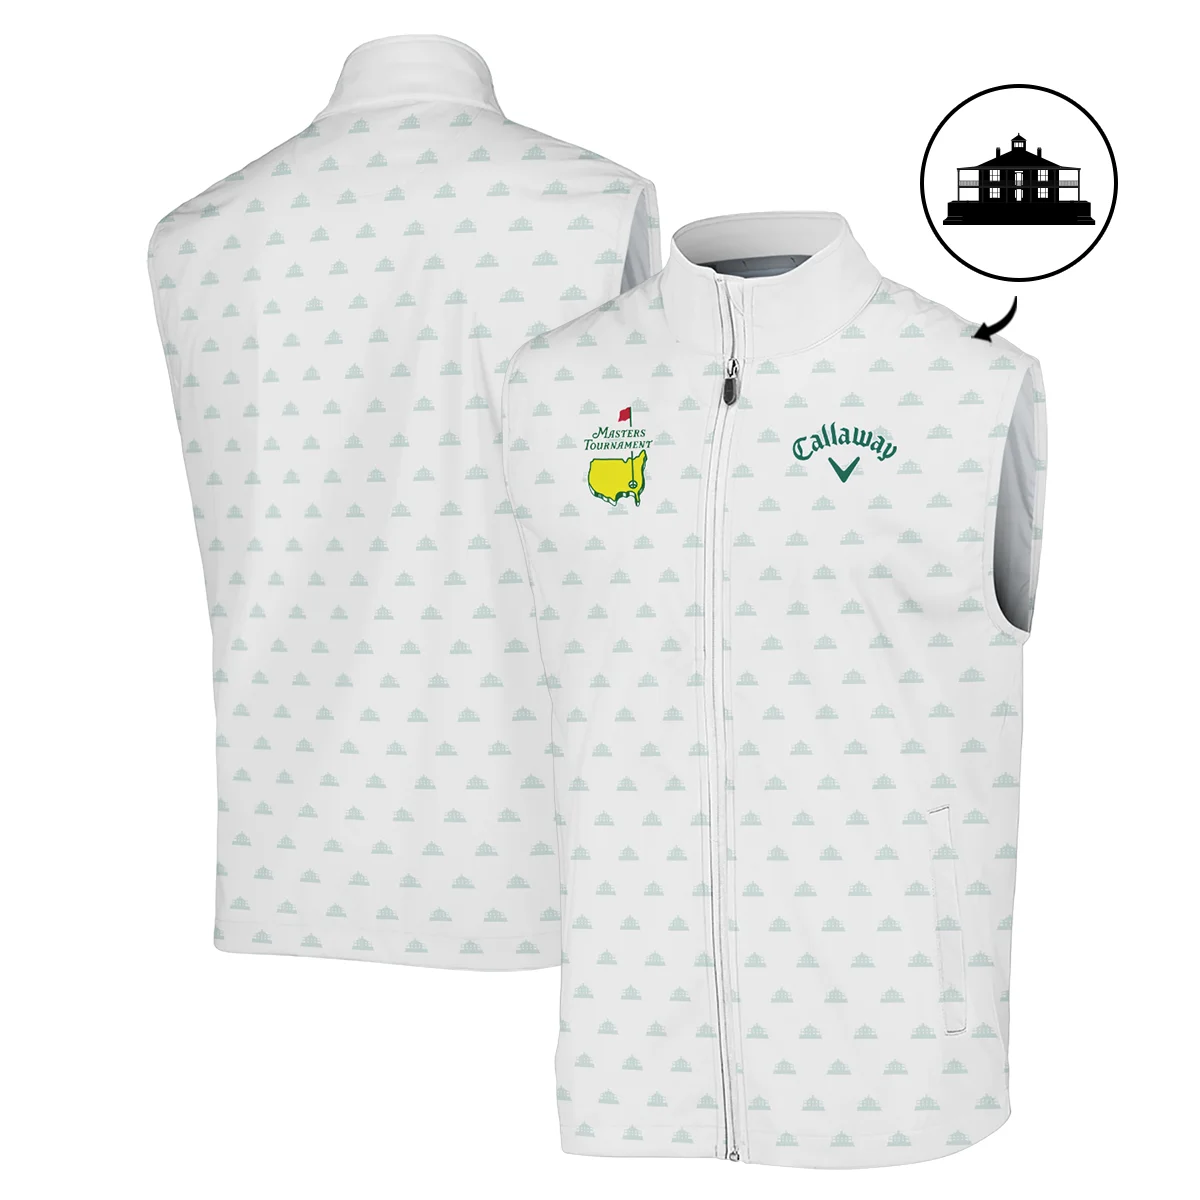 Golf Masters Tournament Callaway Unisex T-Shirt Cup Pattern White Green Golf Sports All Over Print T-Shirt